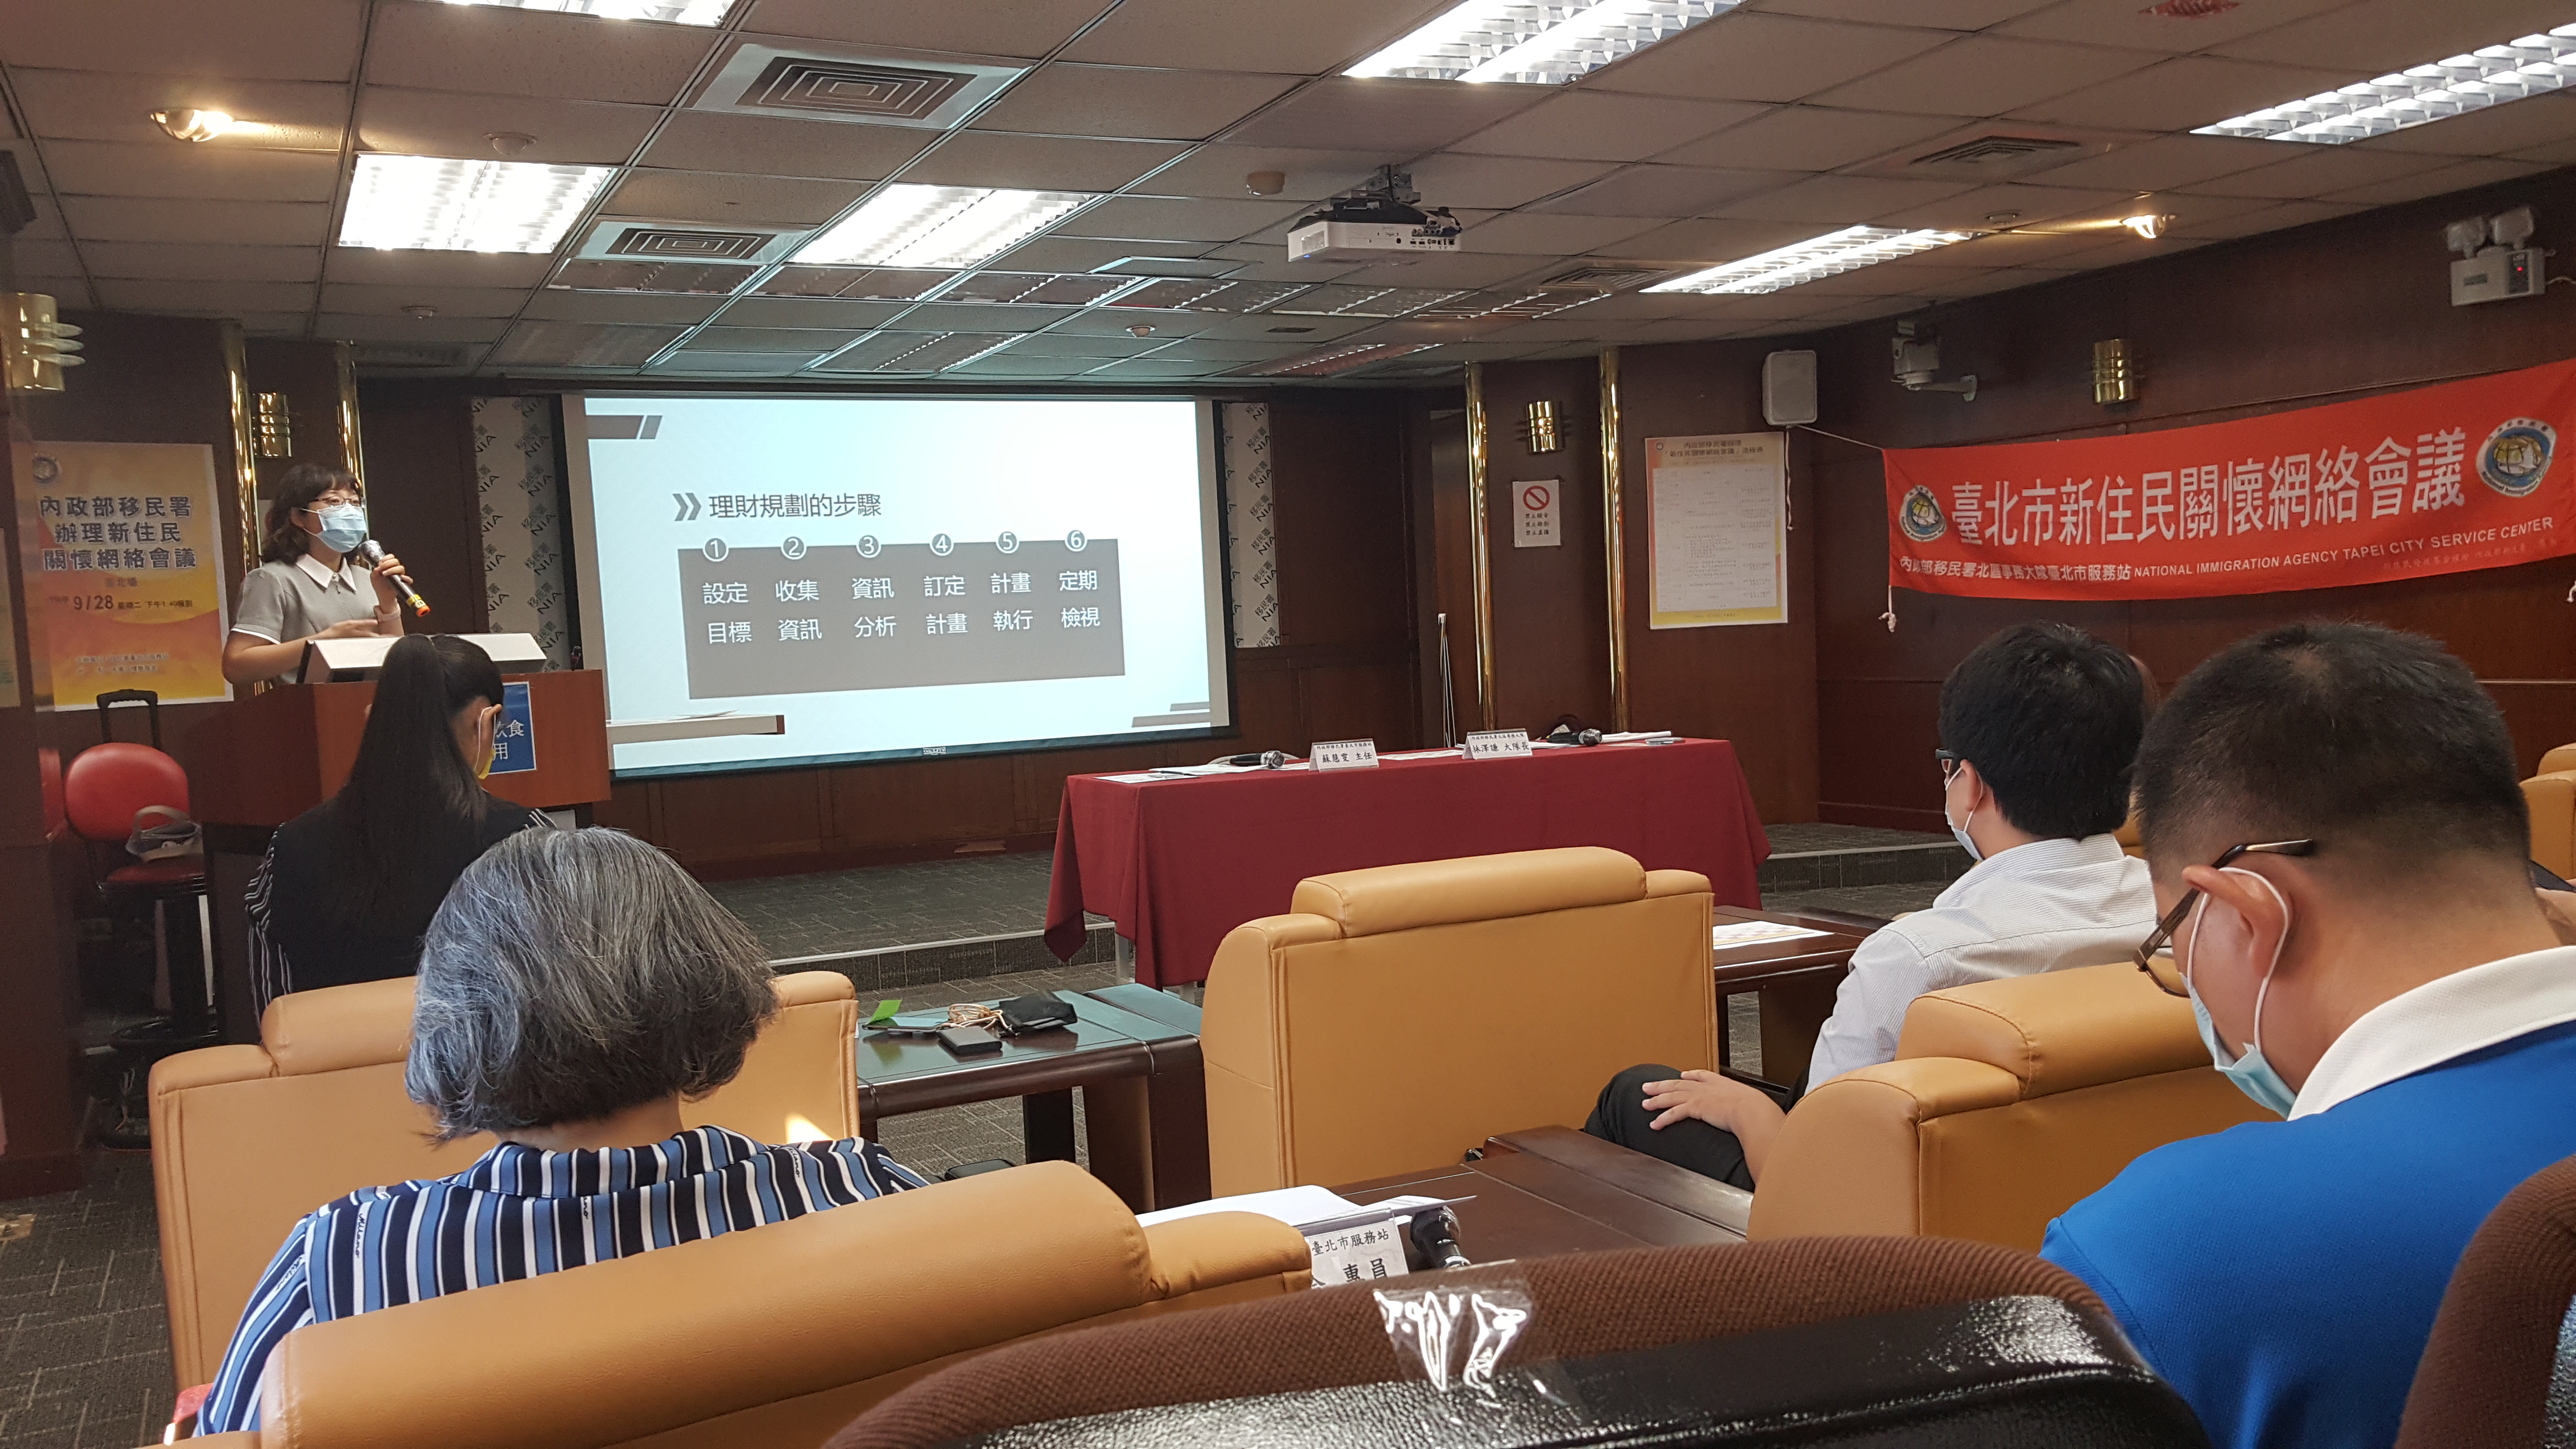 At the meeting, the new immigrants shared the correct concept of investment and financial management. (Photo/Provided by Taipei City Service Station)